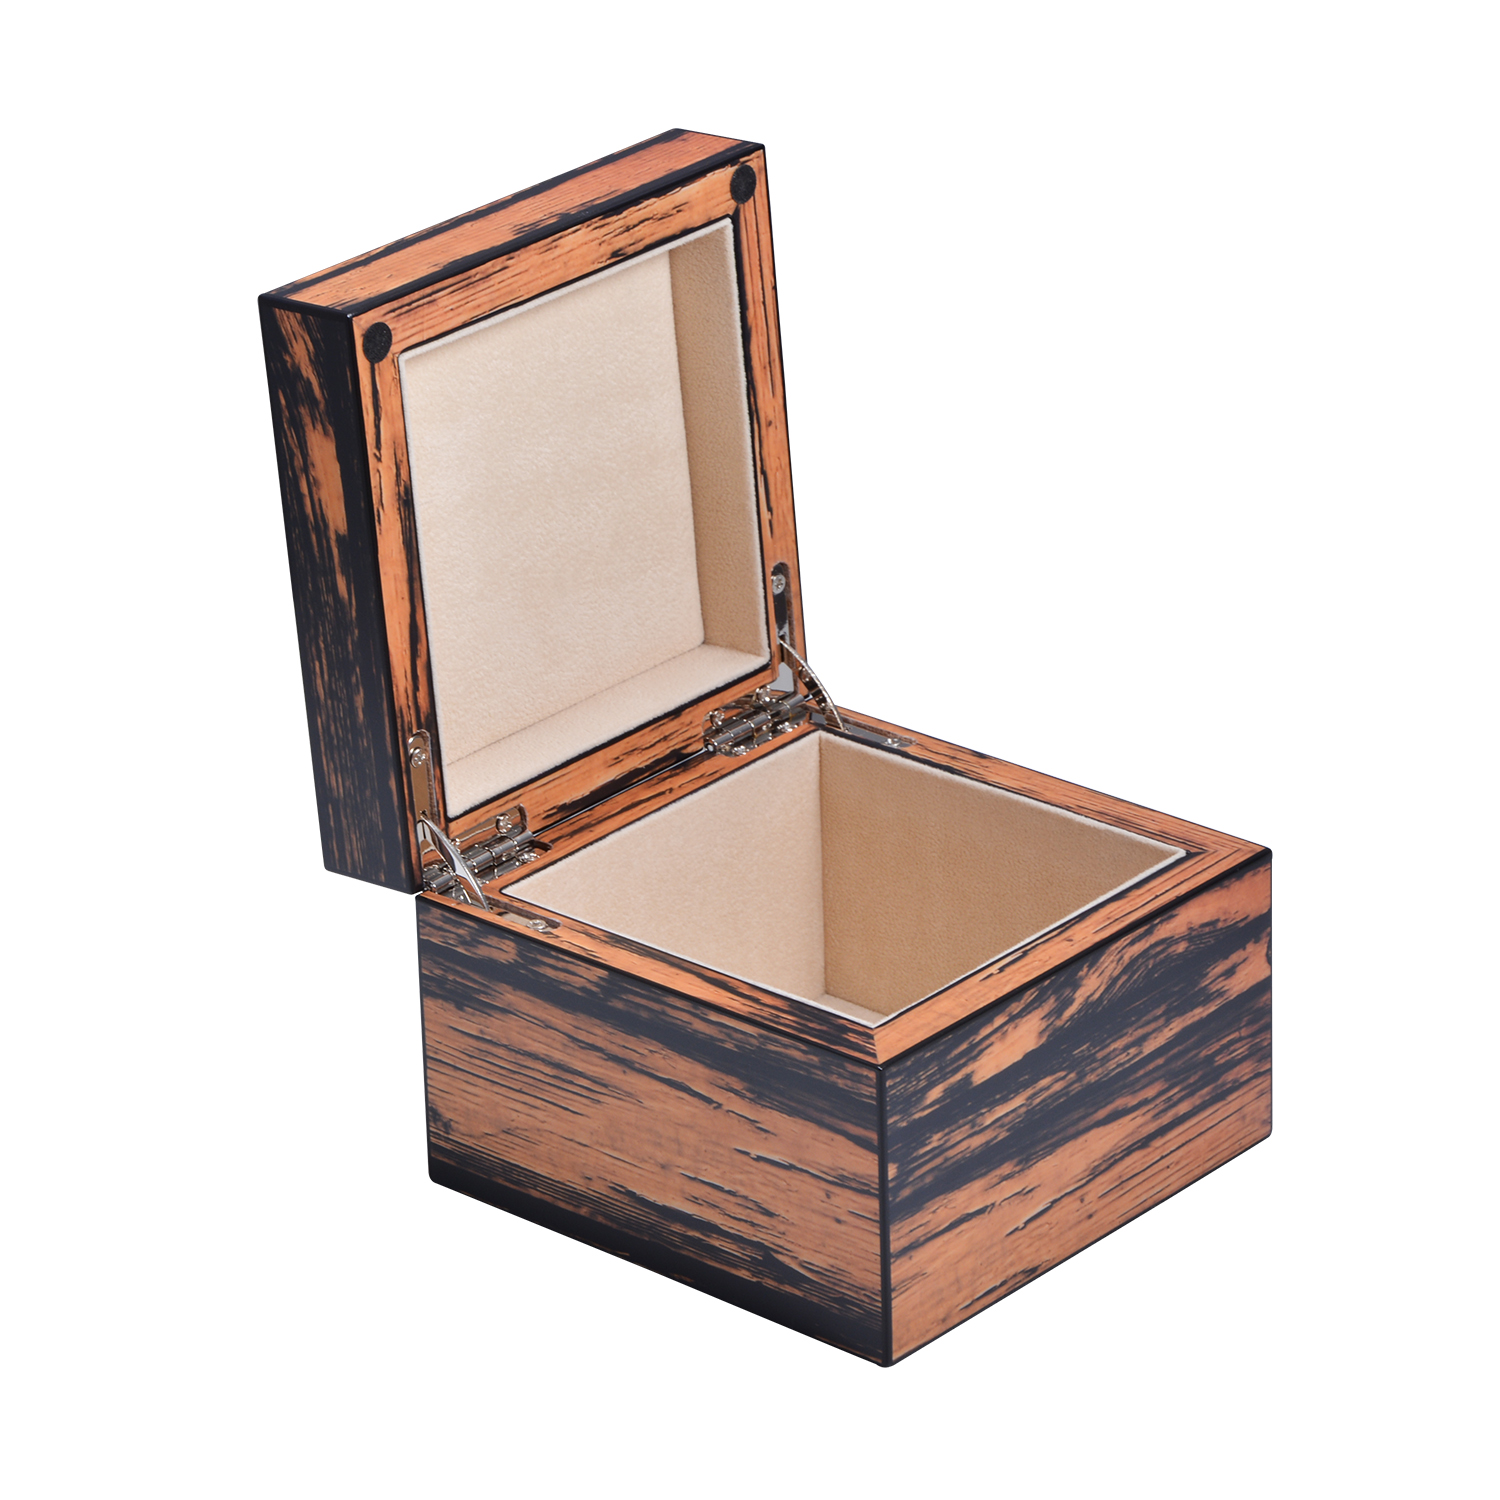  High Quality Wooden packing box 7